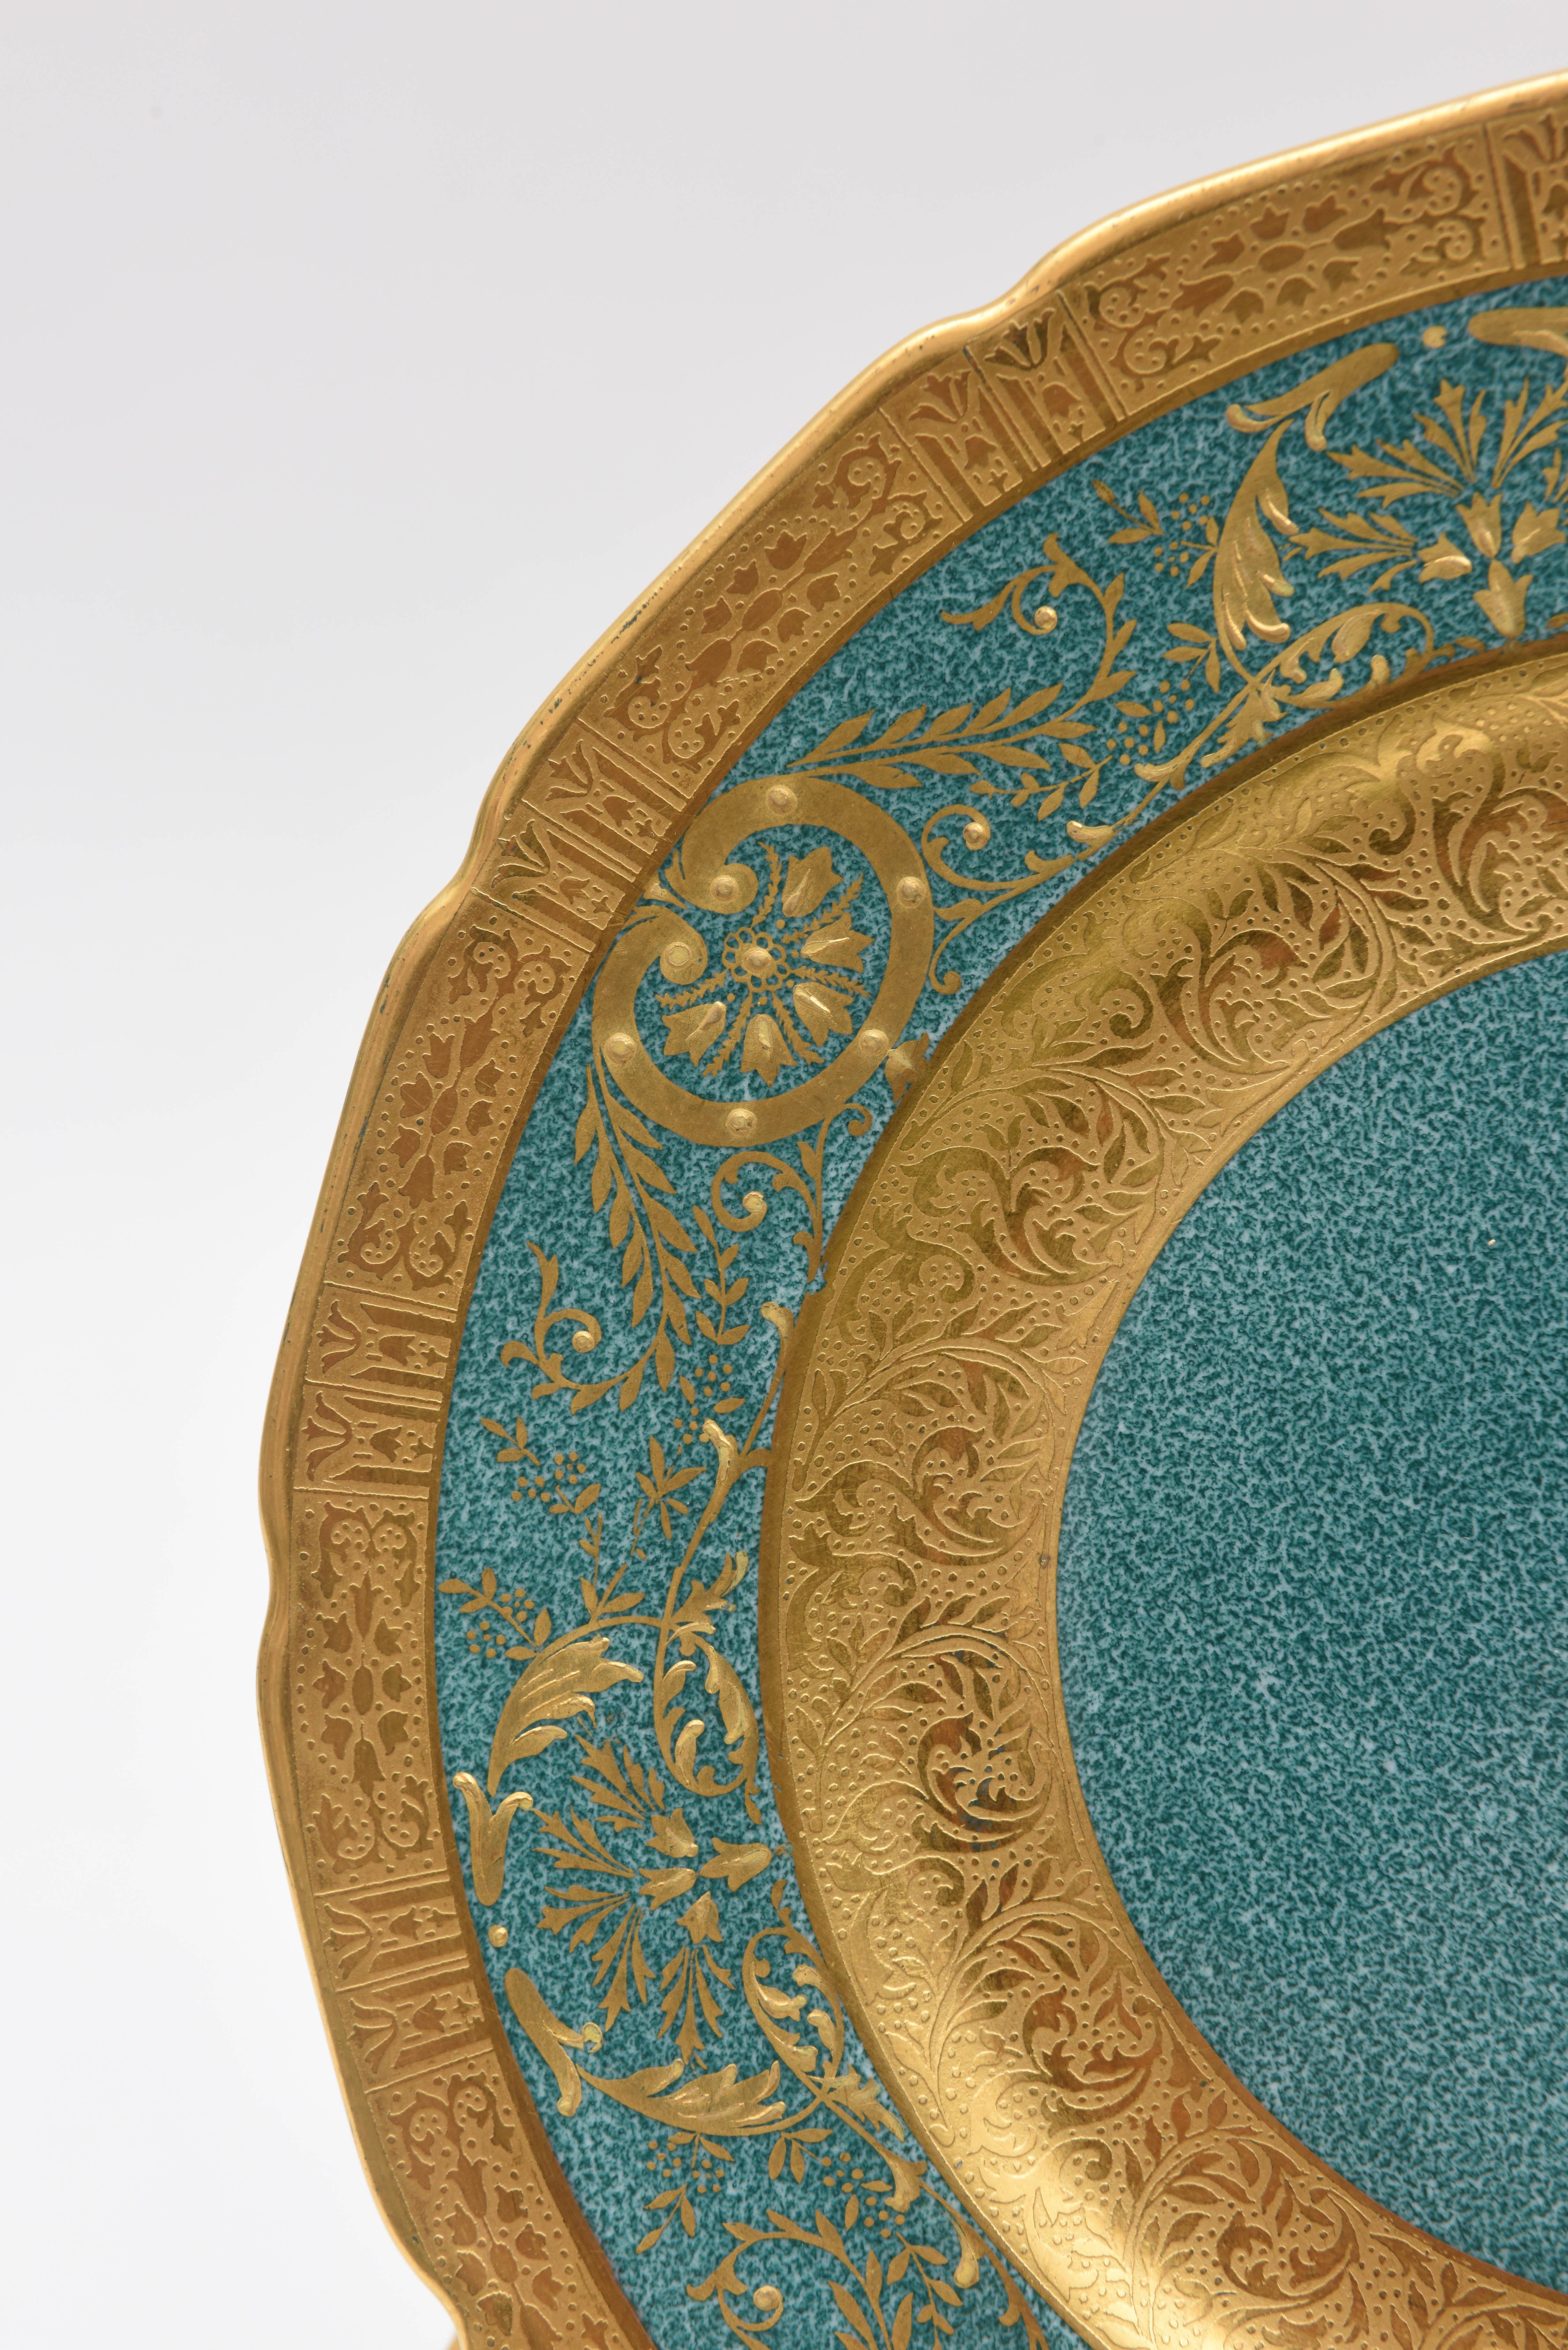 A visually stunning set of antique English plates from the storied Gilded Age firm of Royal Doulton. Their Classic Robert Allen shaped plate design has the added color technique of a powder finish which gives the pattern an all-over faux marble